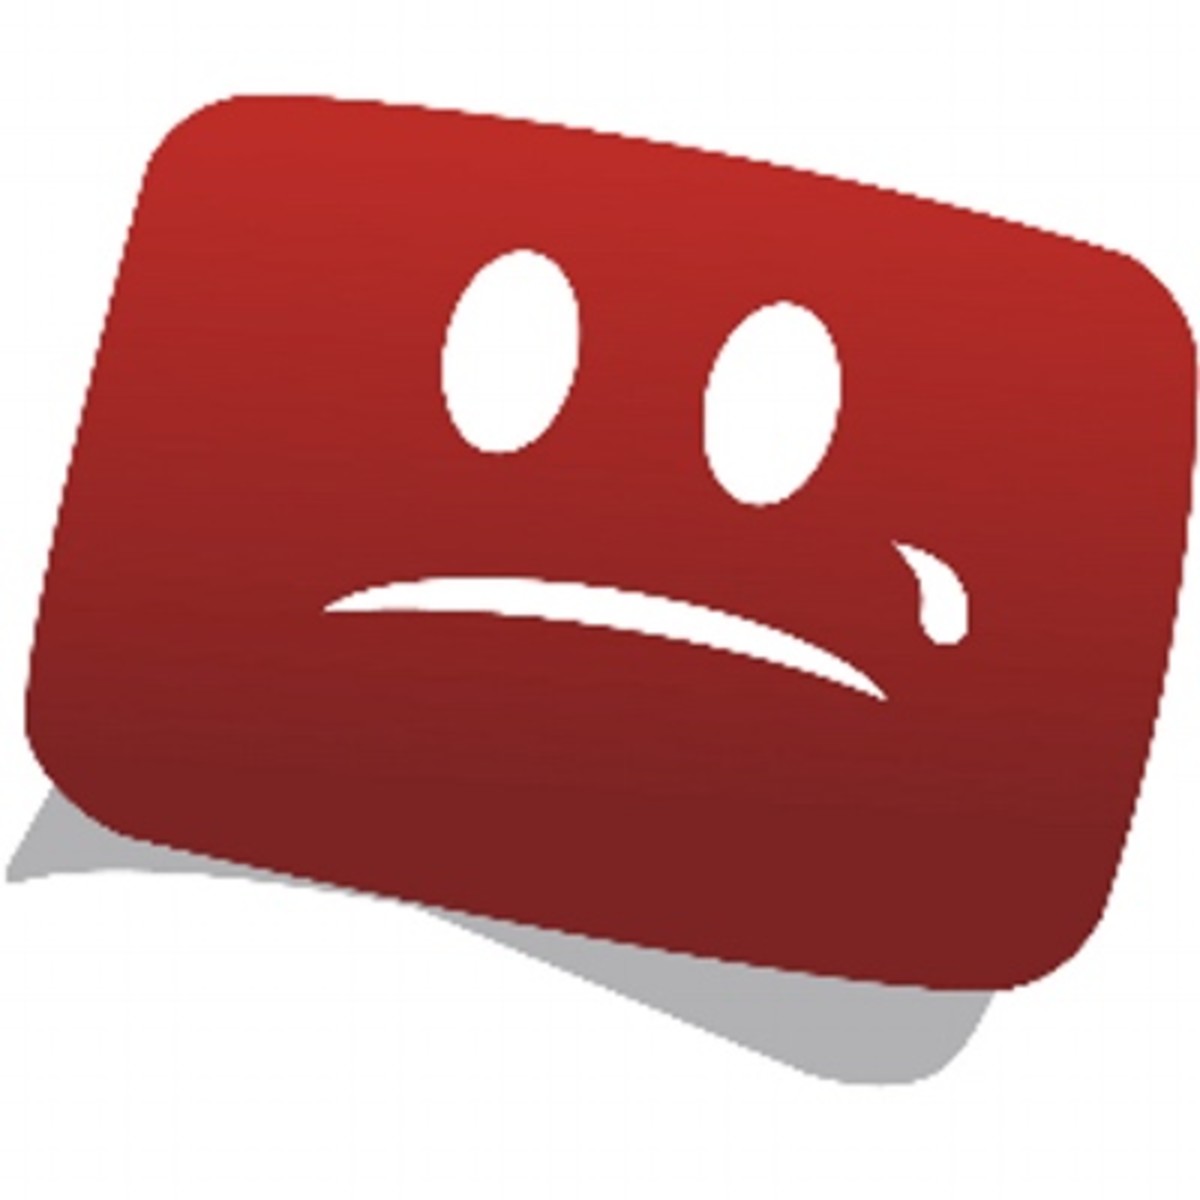 youtube-screwed-small-youtube-channels-with-their-new-memorization-policy